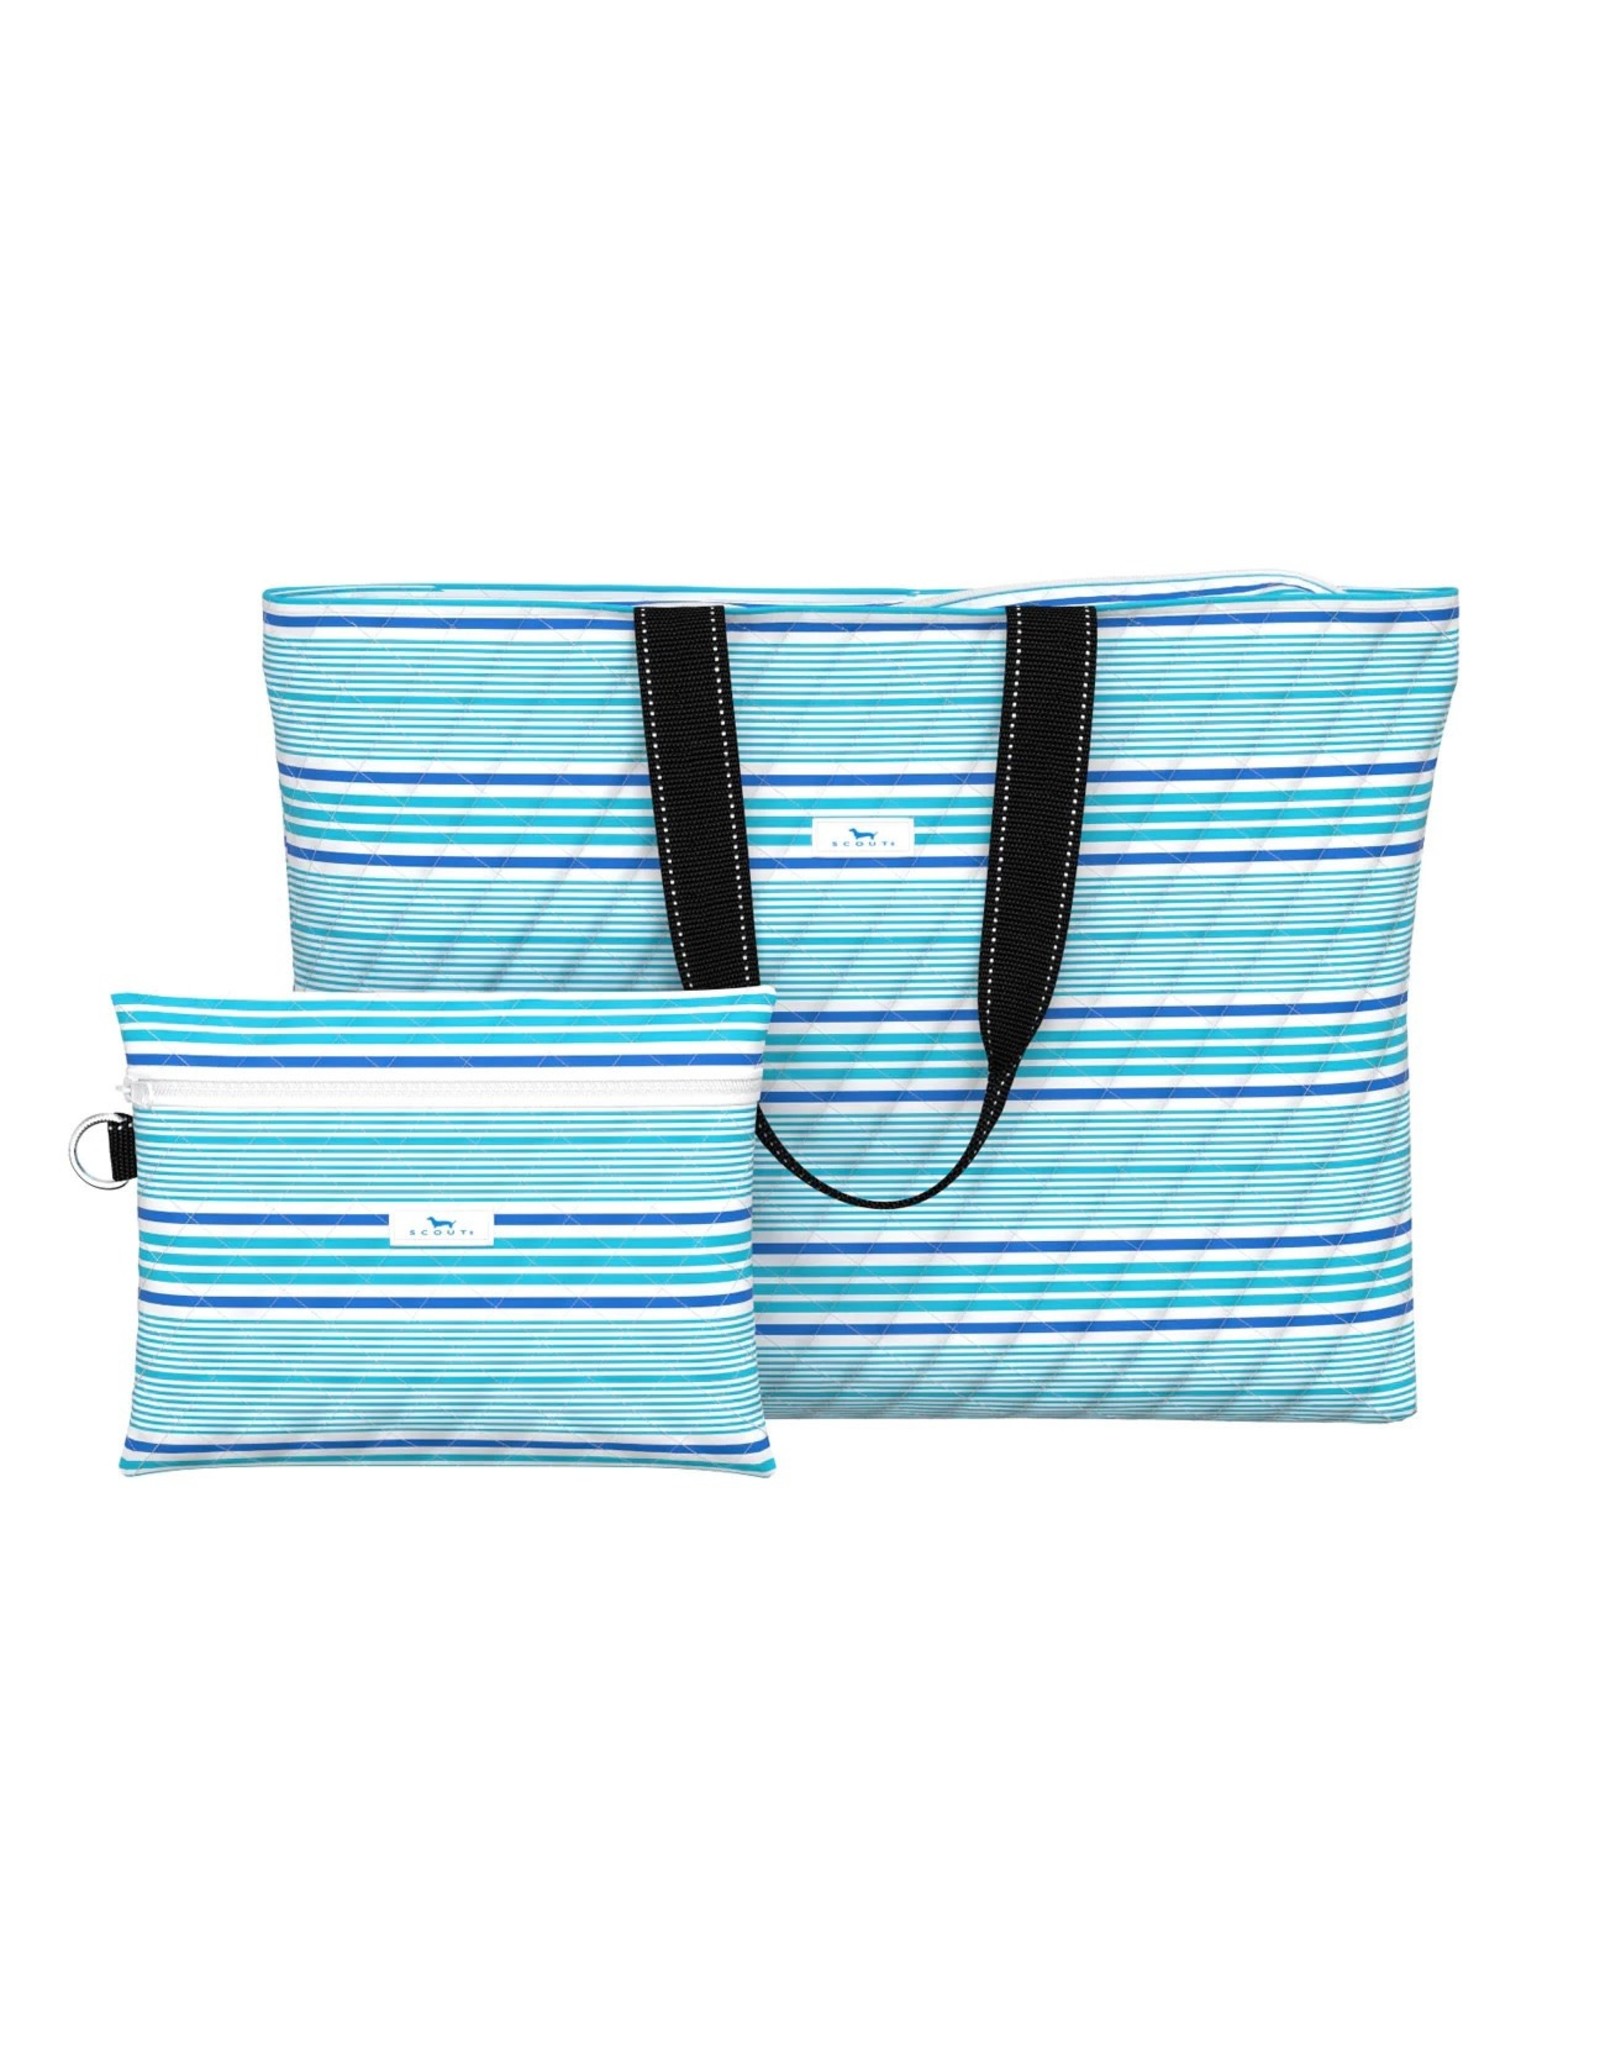 Scout Bags Plus 1 Foldable Travel Bag Seas The Day